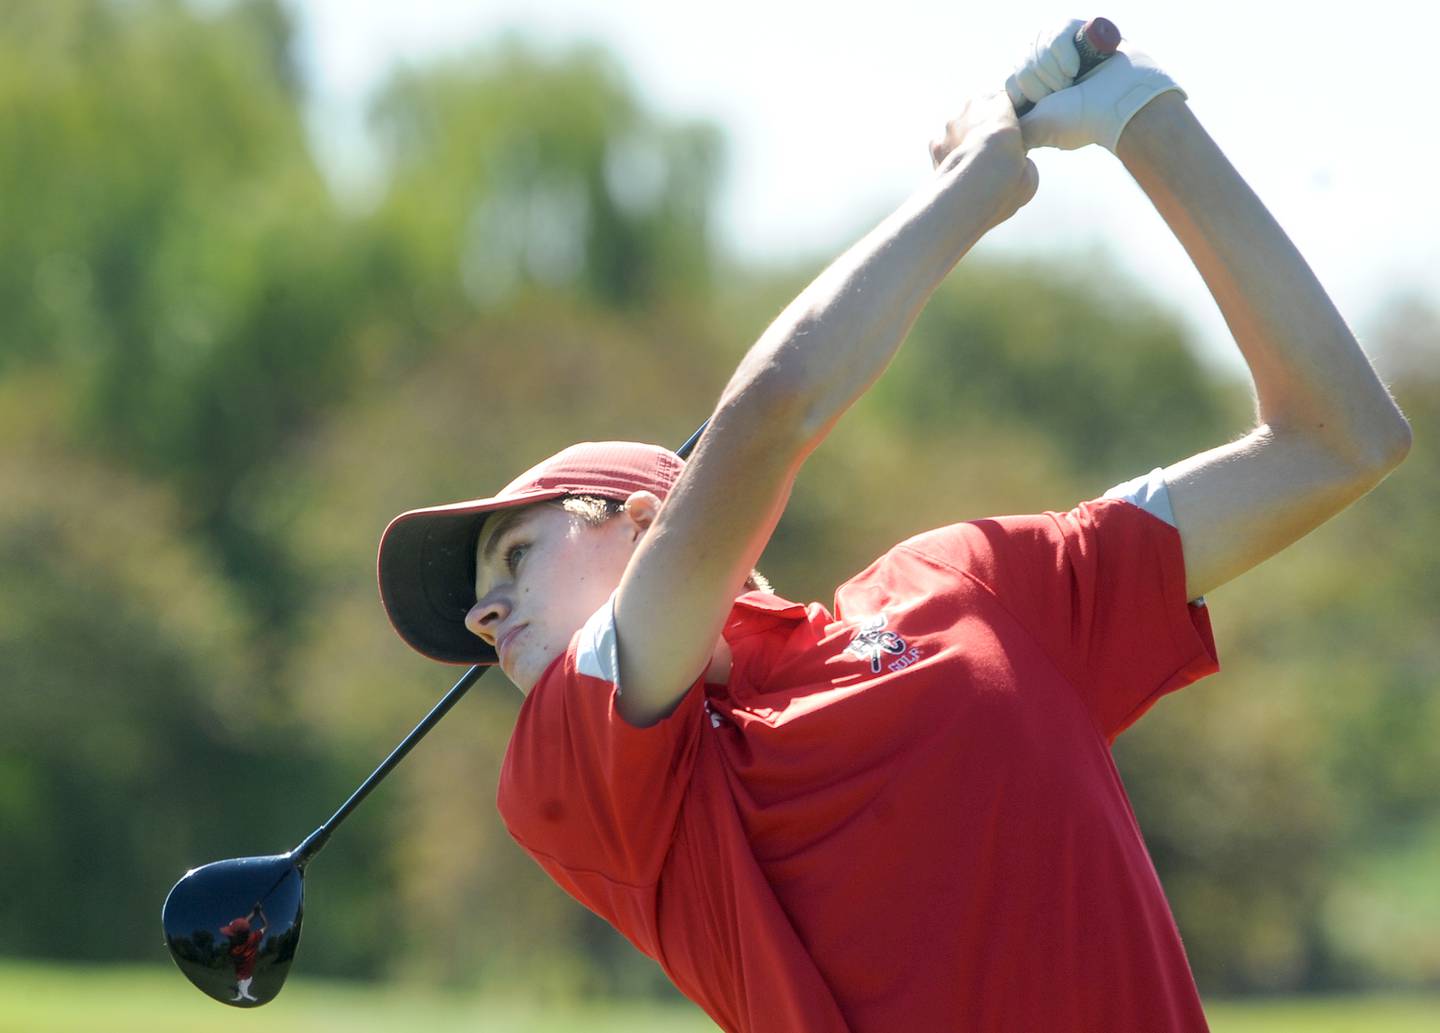 Hinsdale Central's Emil Riegger watches his tee off on the 7th hole during the Class 3A Oswego Boys Golf Sectional at Blackberry Oaks Golf Course in Bristol on Monday, Oct. 3, 2022.